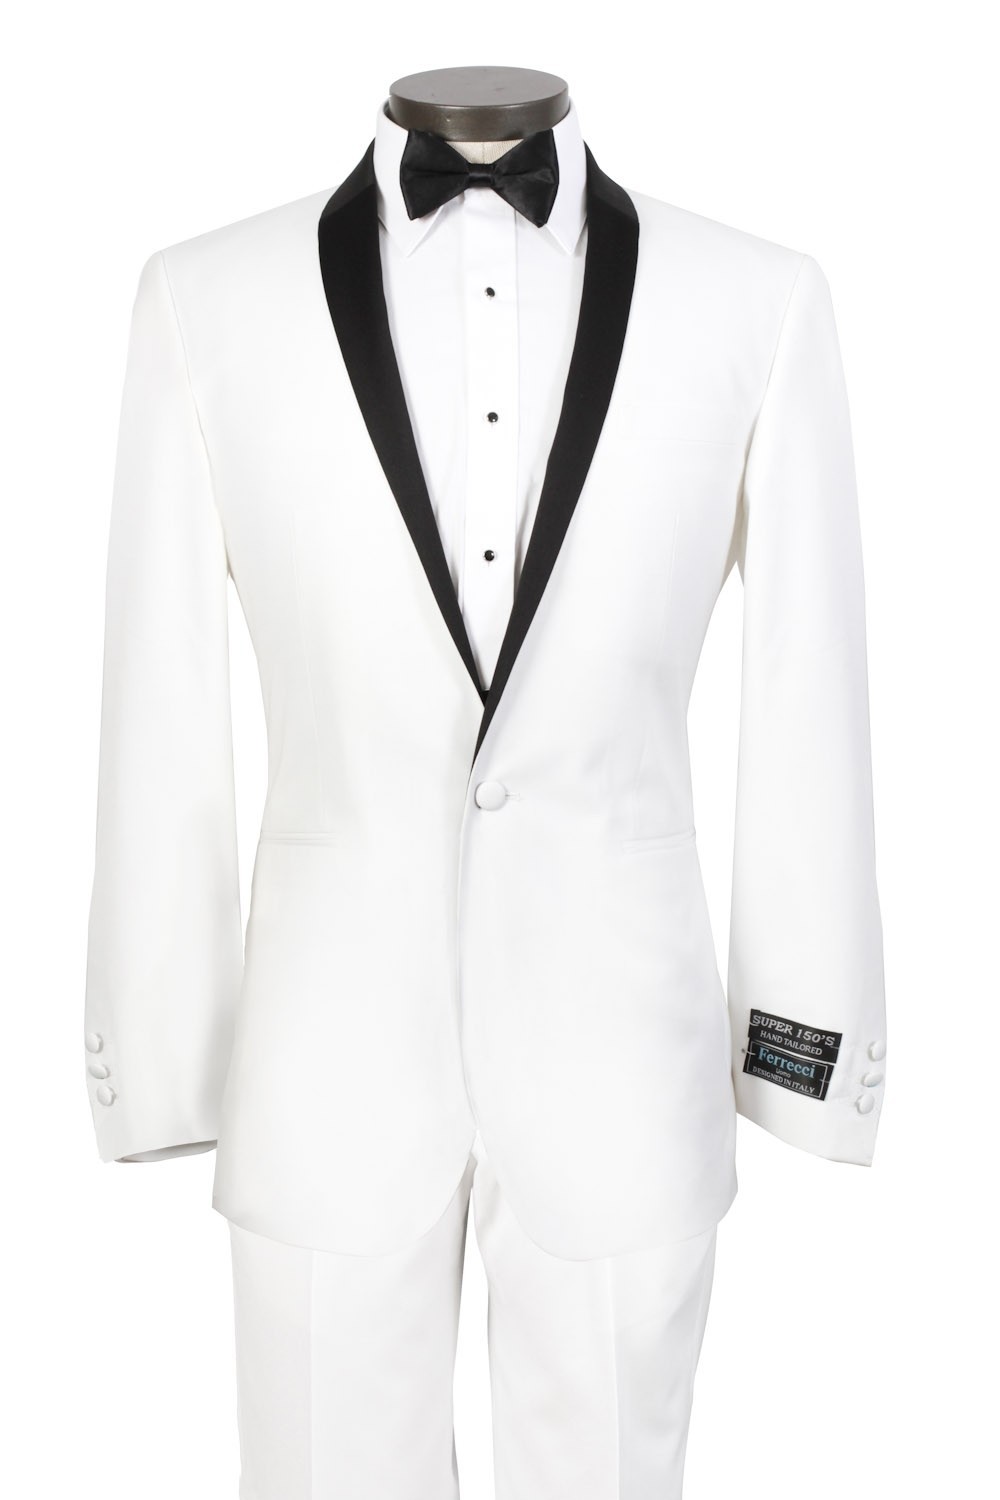 2013 Custom Made White wedding Tuxedo for men with Black Shawl Lapel and 1 Button Front- Includes White Trousers+jacket+Tie